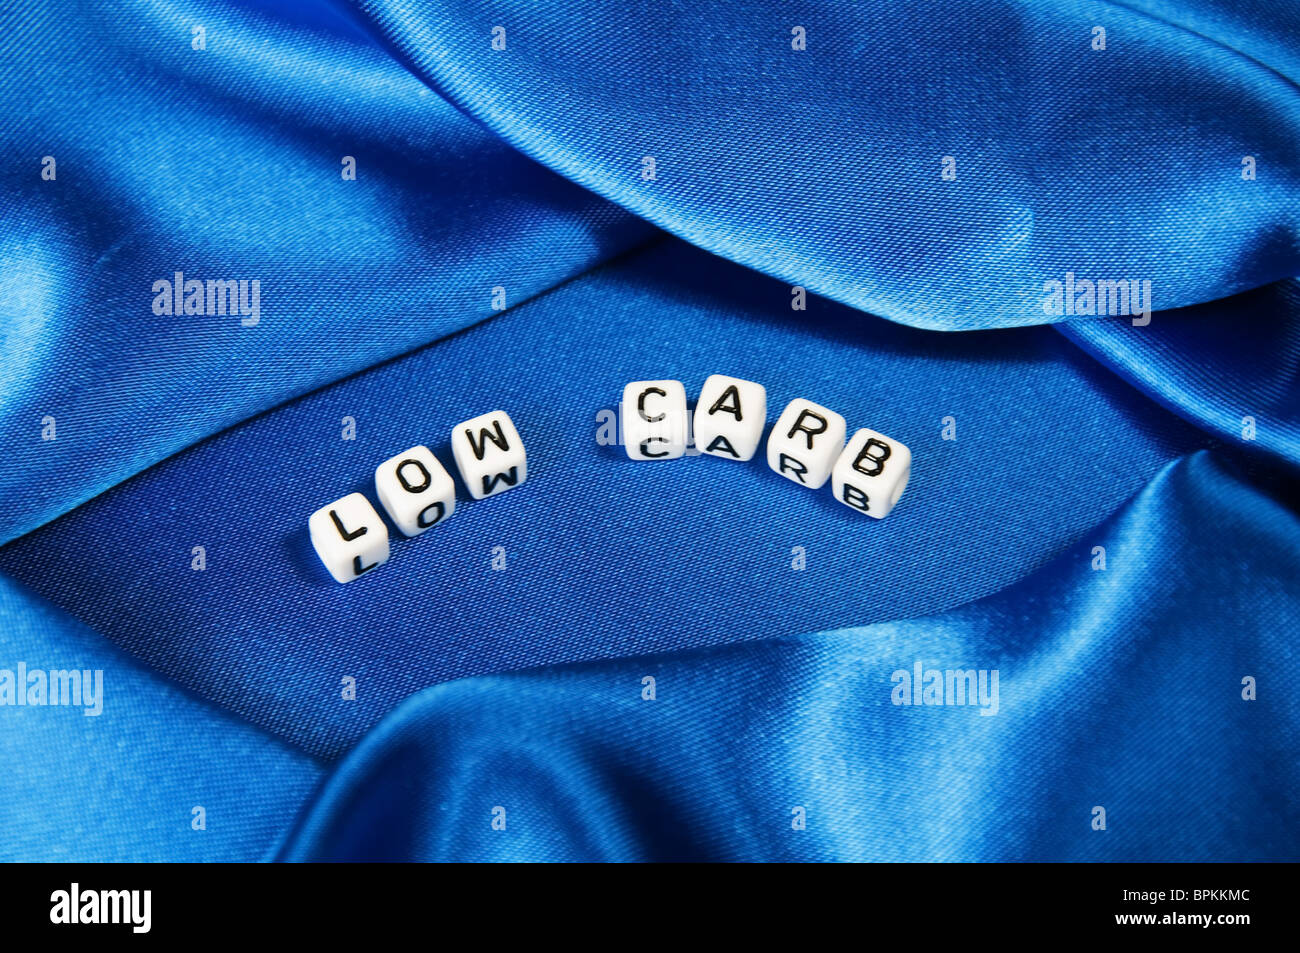 Royal blue satin background with rich folds and wrinkles for texture is the word low carb in cube lettering in series Stock Photo